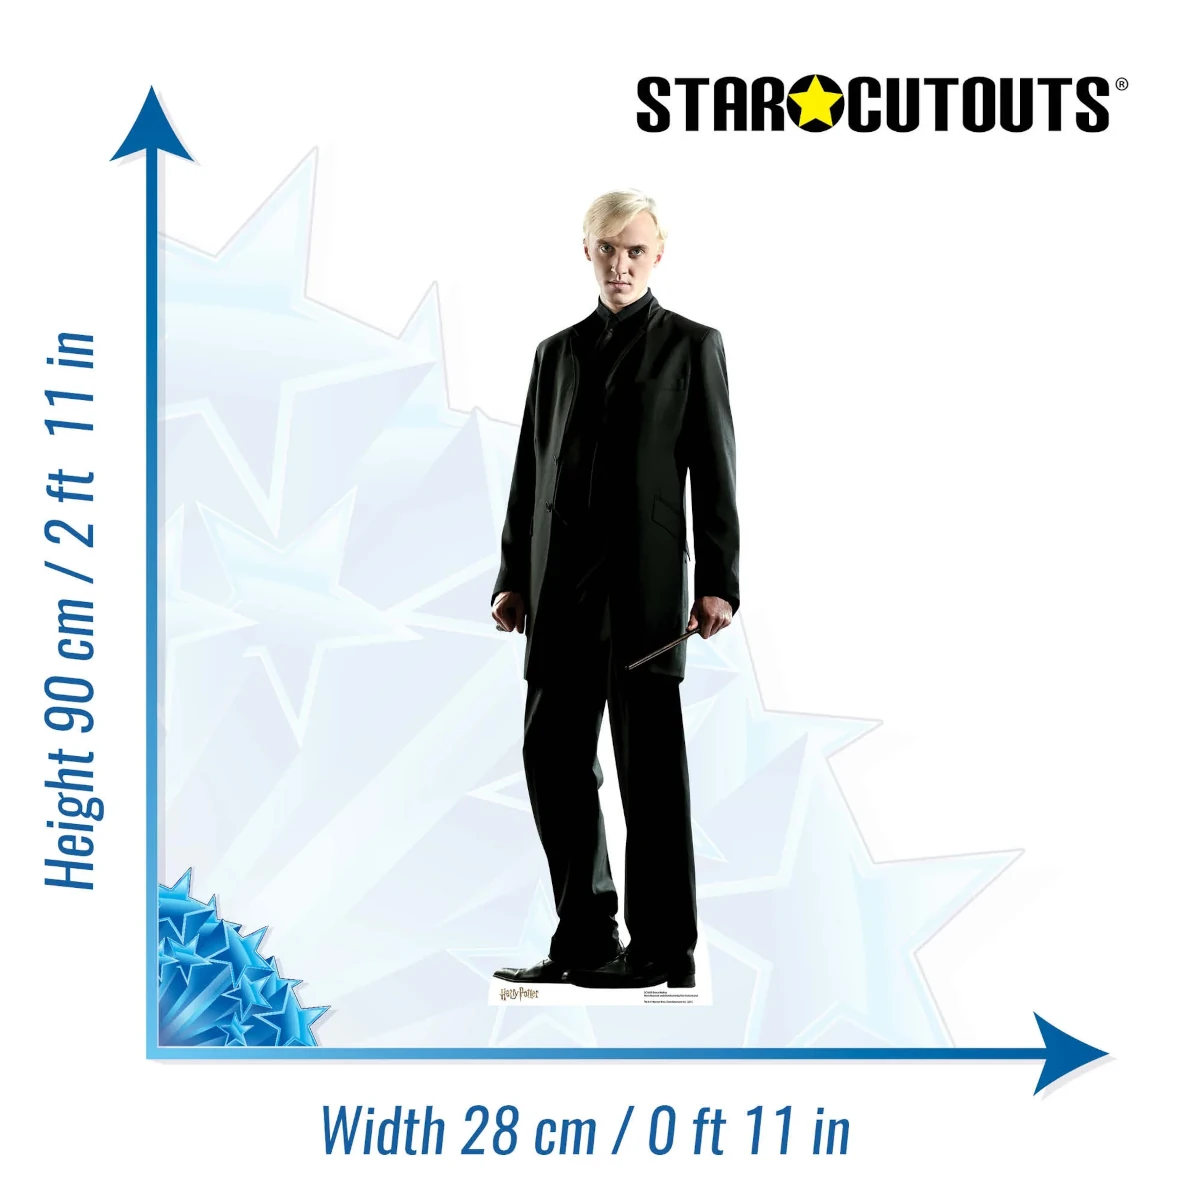 SC1655 Draco Malfoy (Harry Potter) Official Mini Cardboard Cutout Standee Size